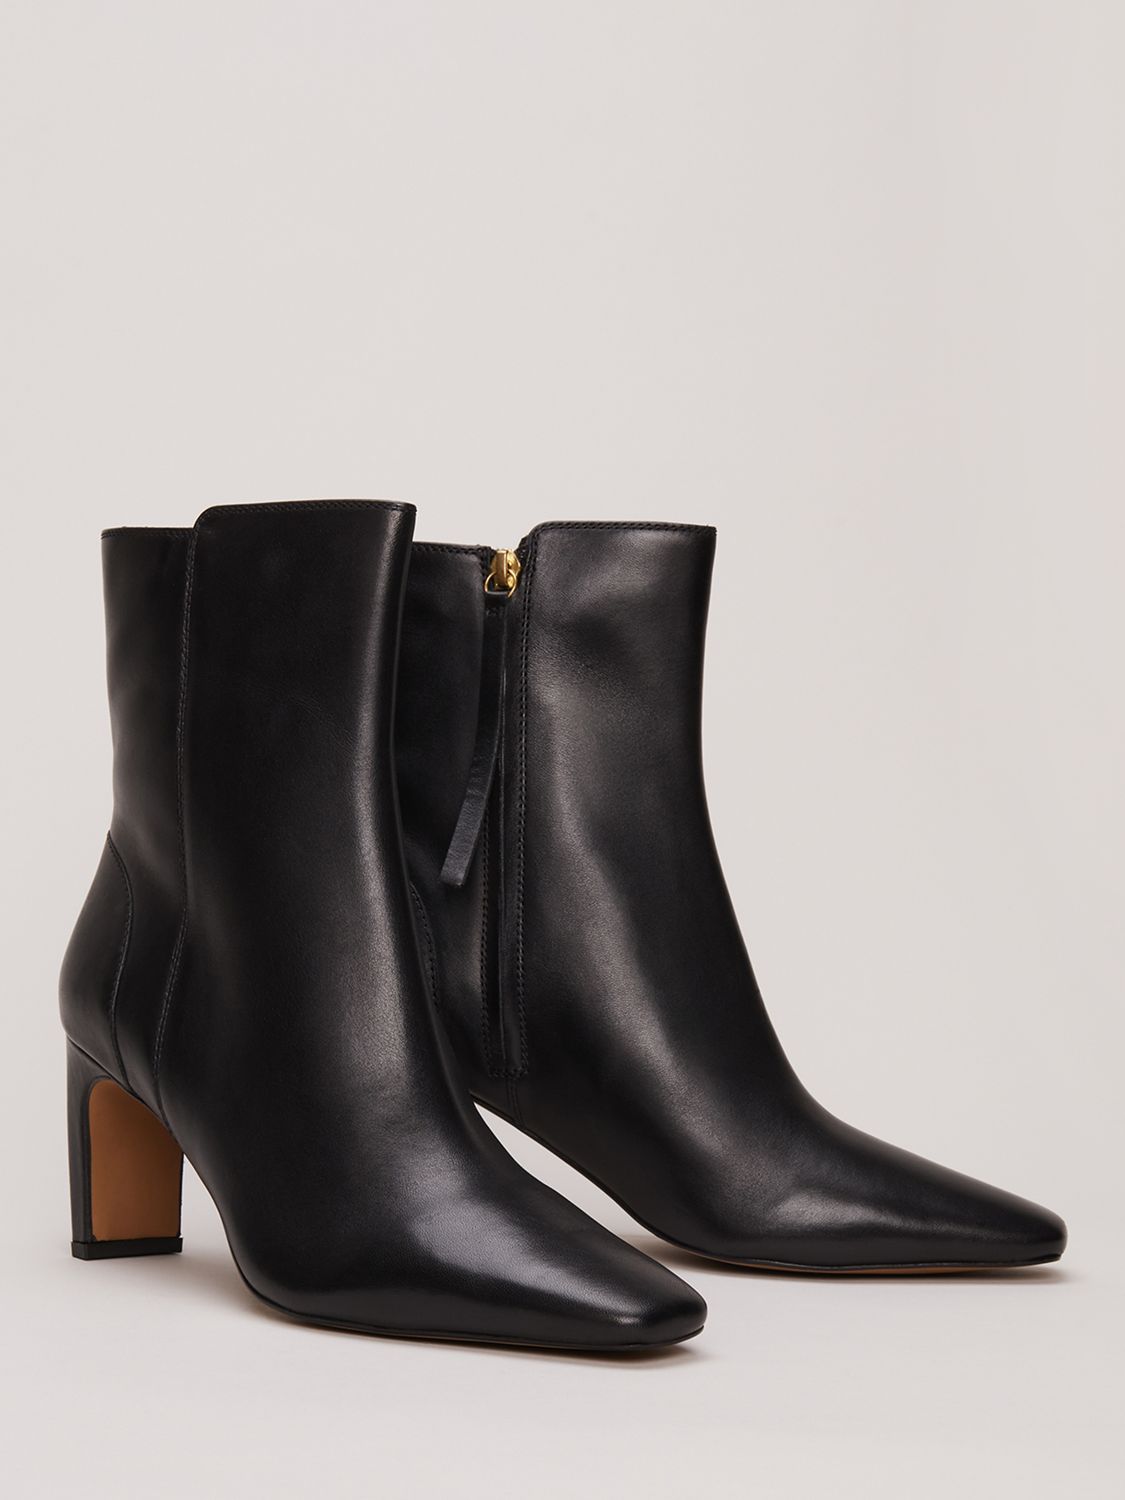 Buy Phase Eight Slim Block Heel Leather Ankle Boots, Black Online at johnlewis.com